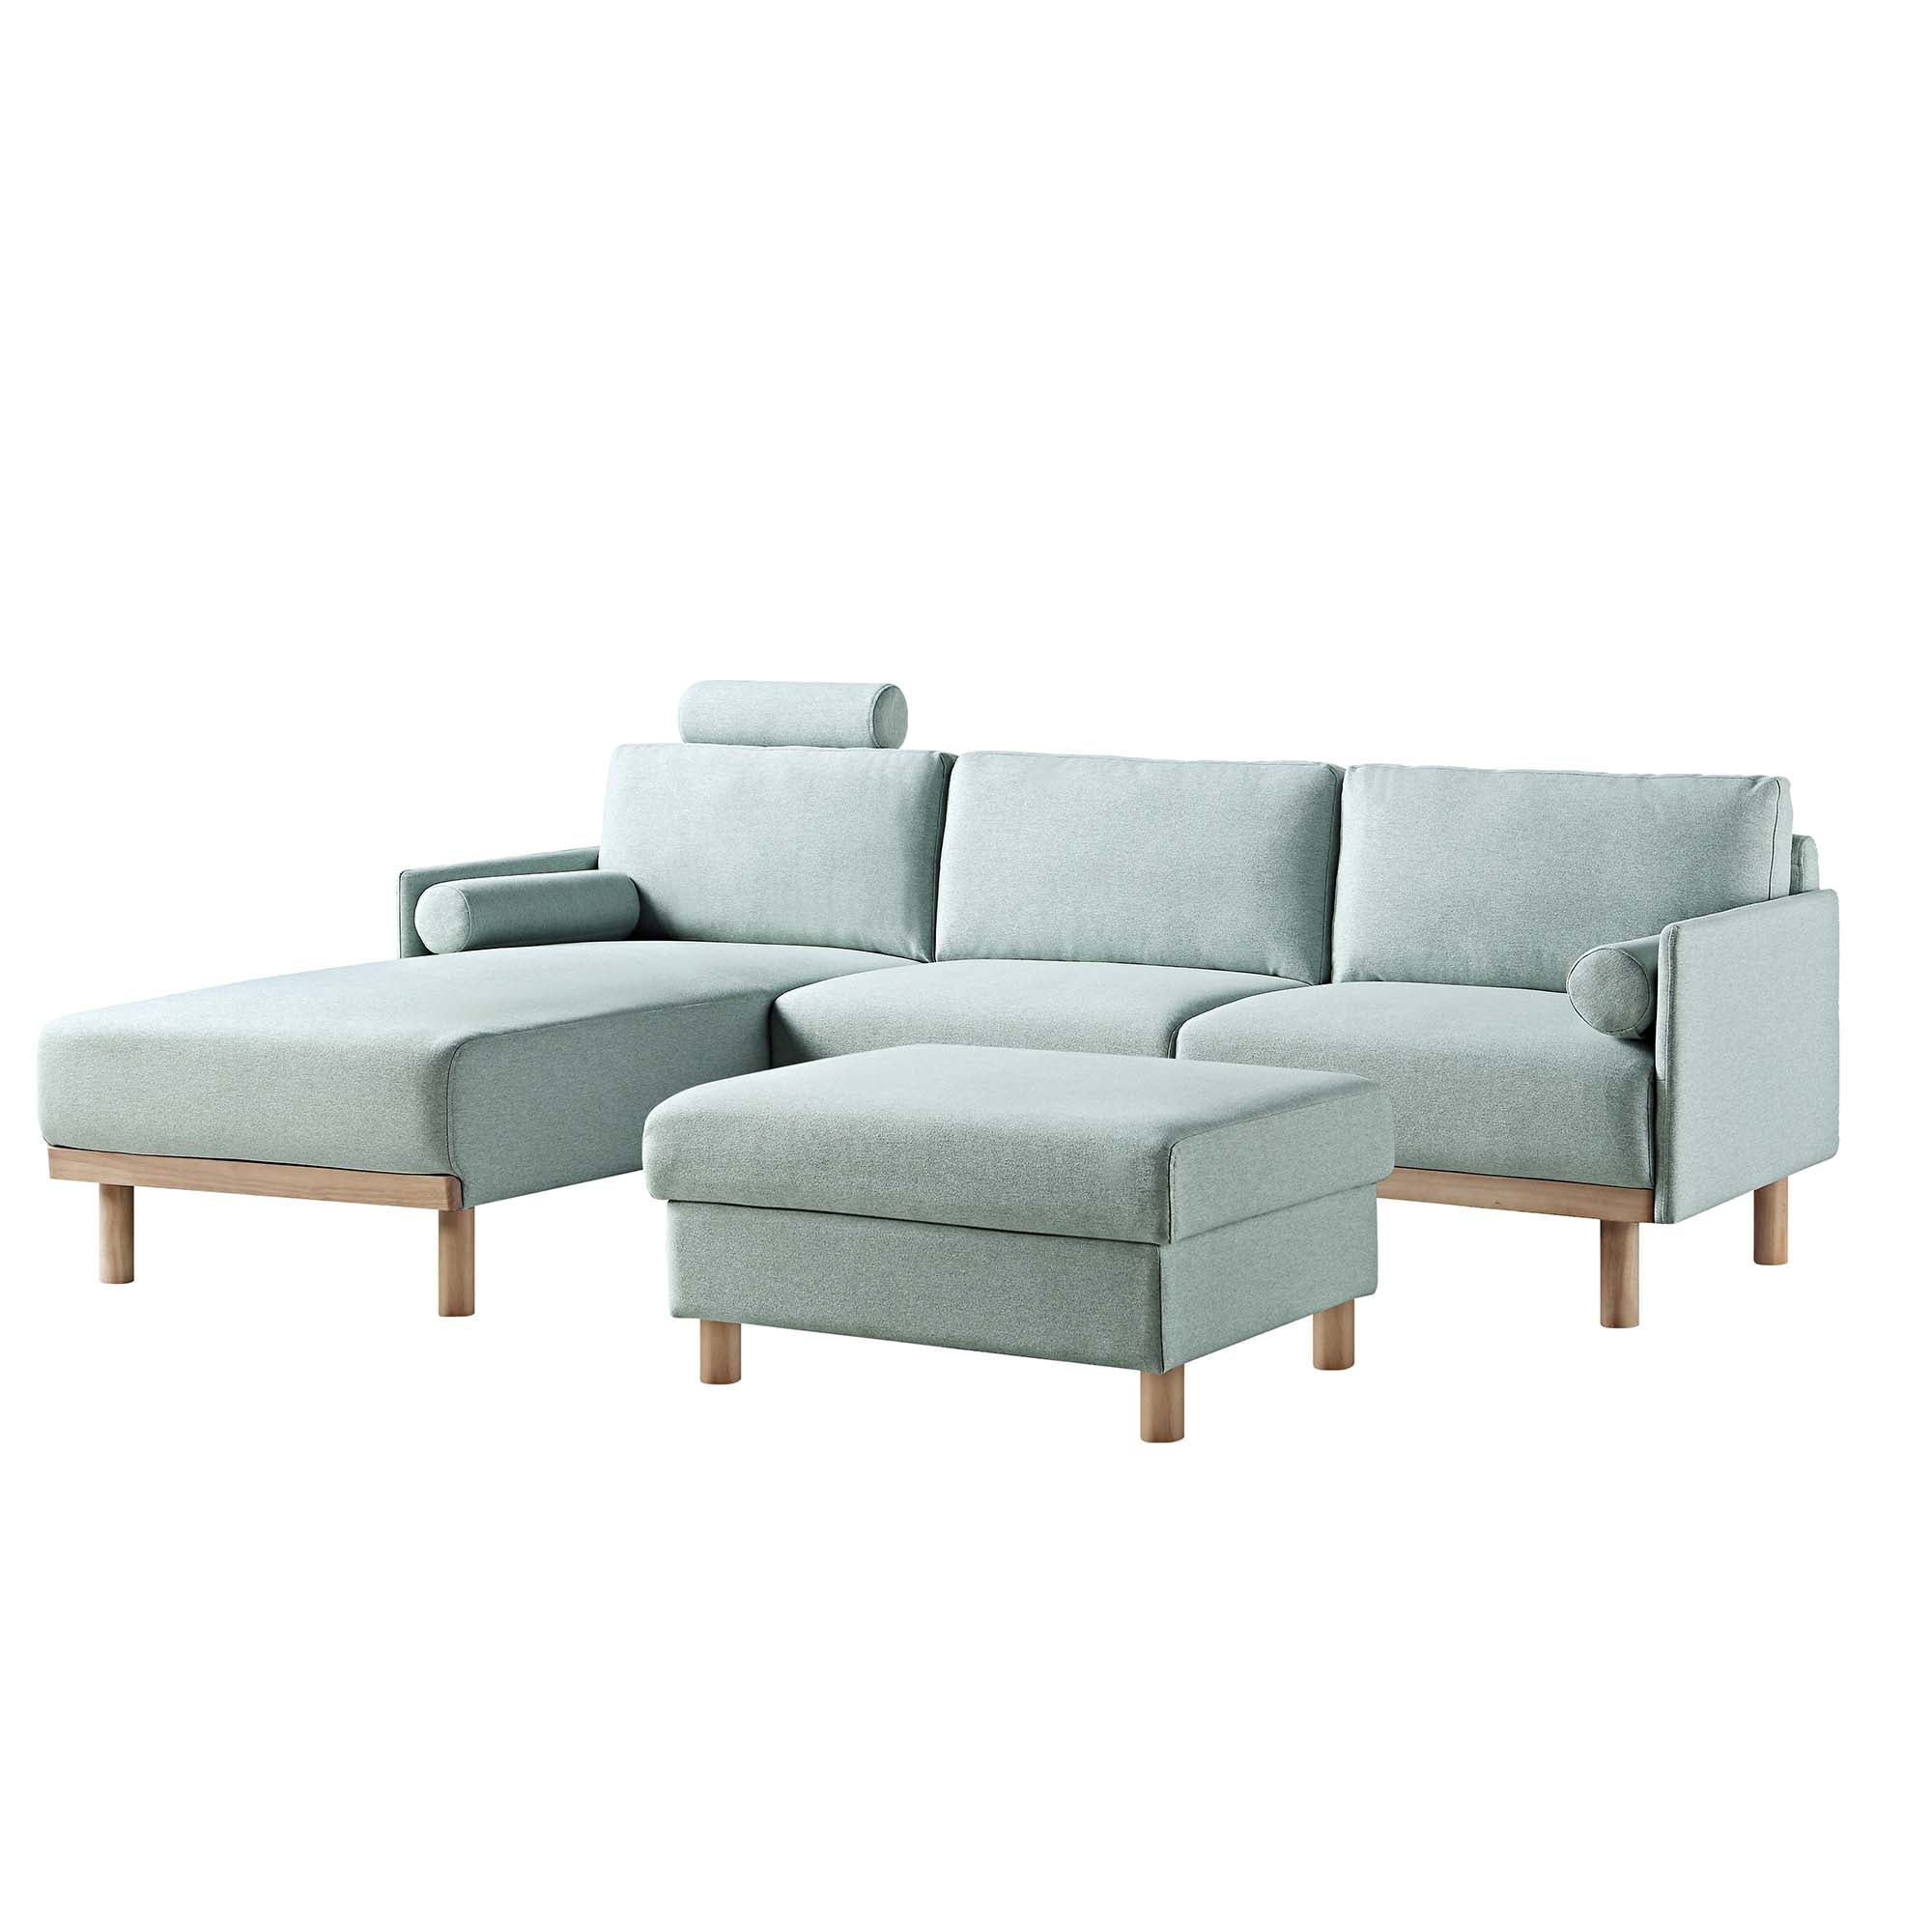 Timber Sage Green Fabric Sofa, Large 3-Seater Chaise Sofa Left Hand